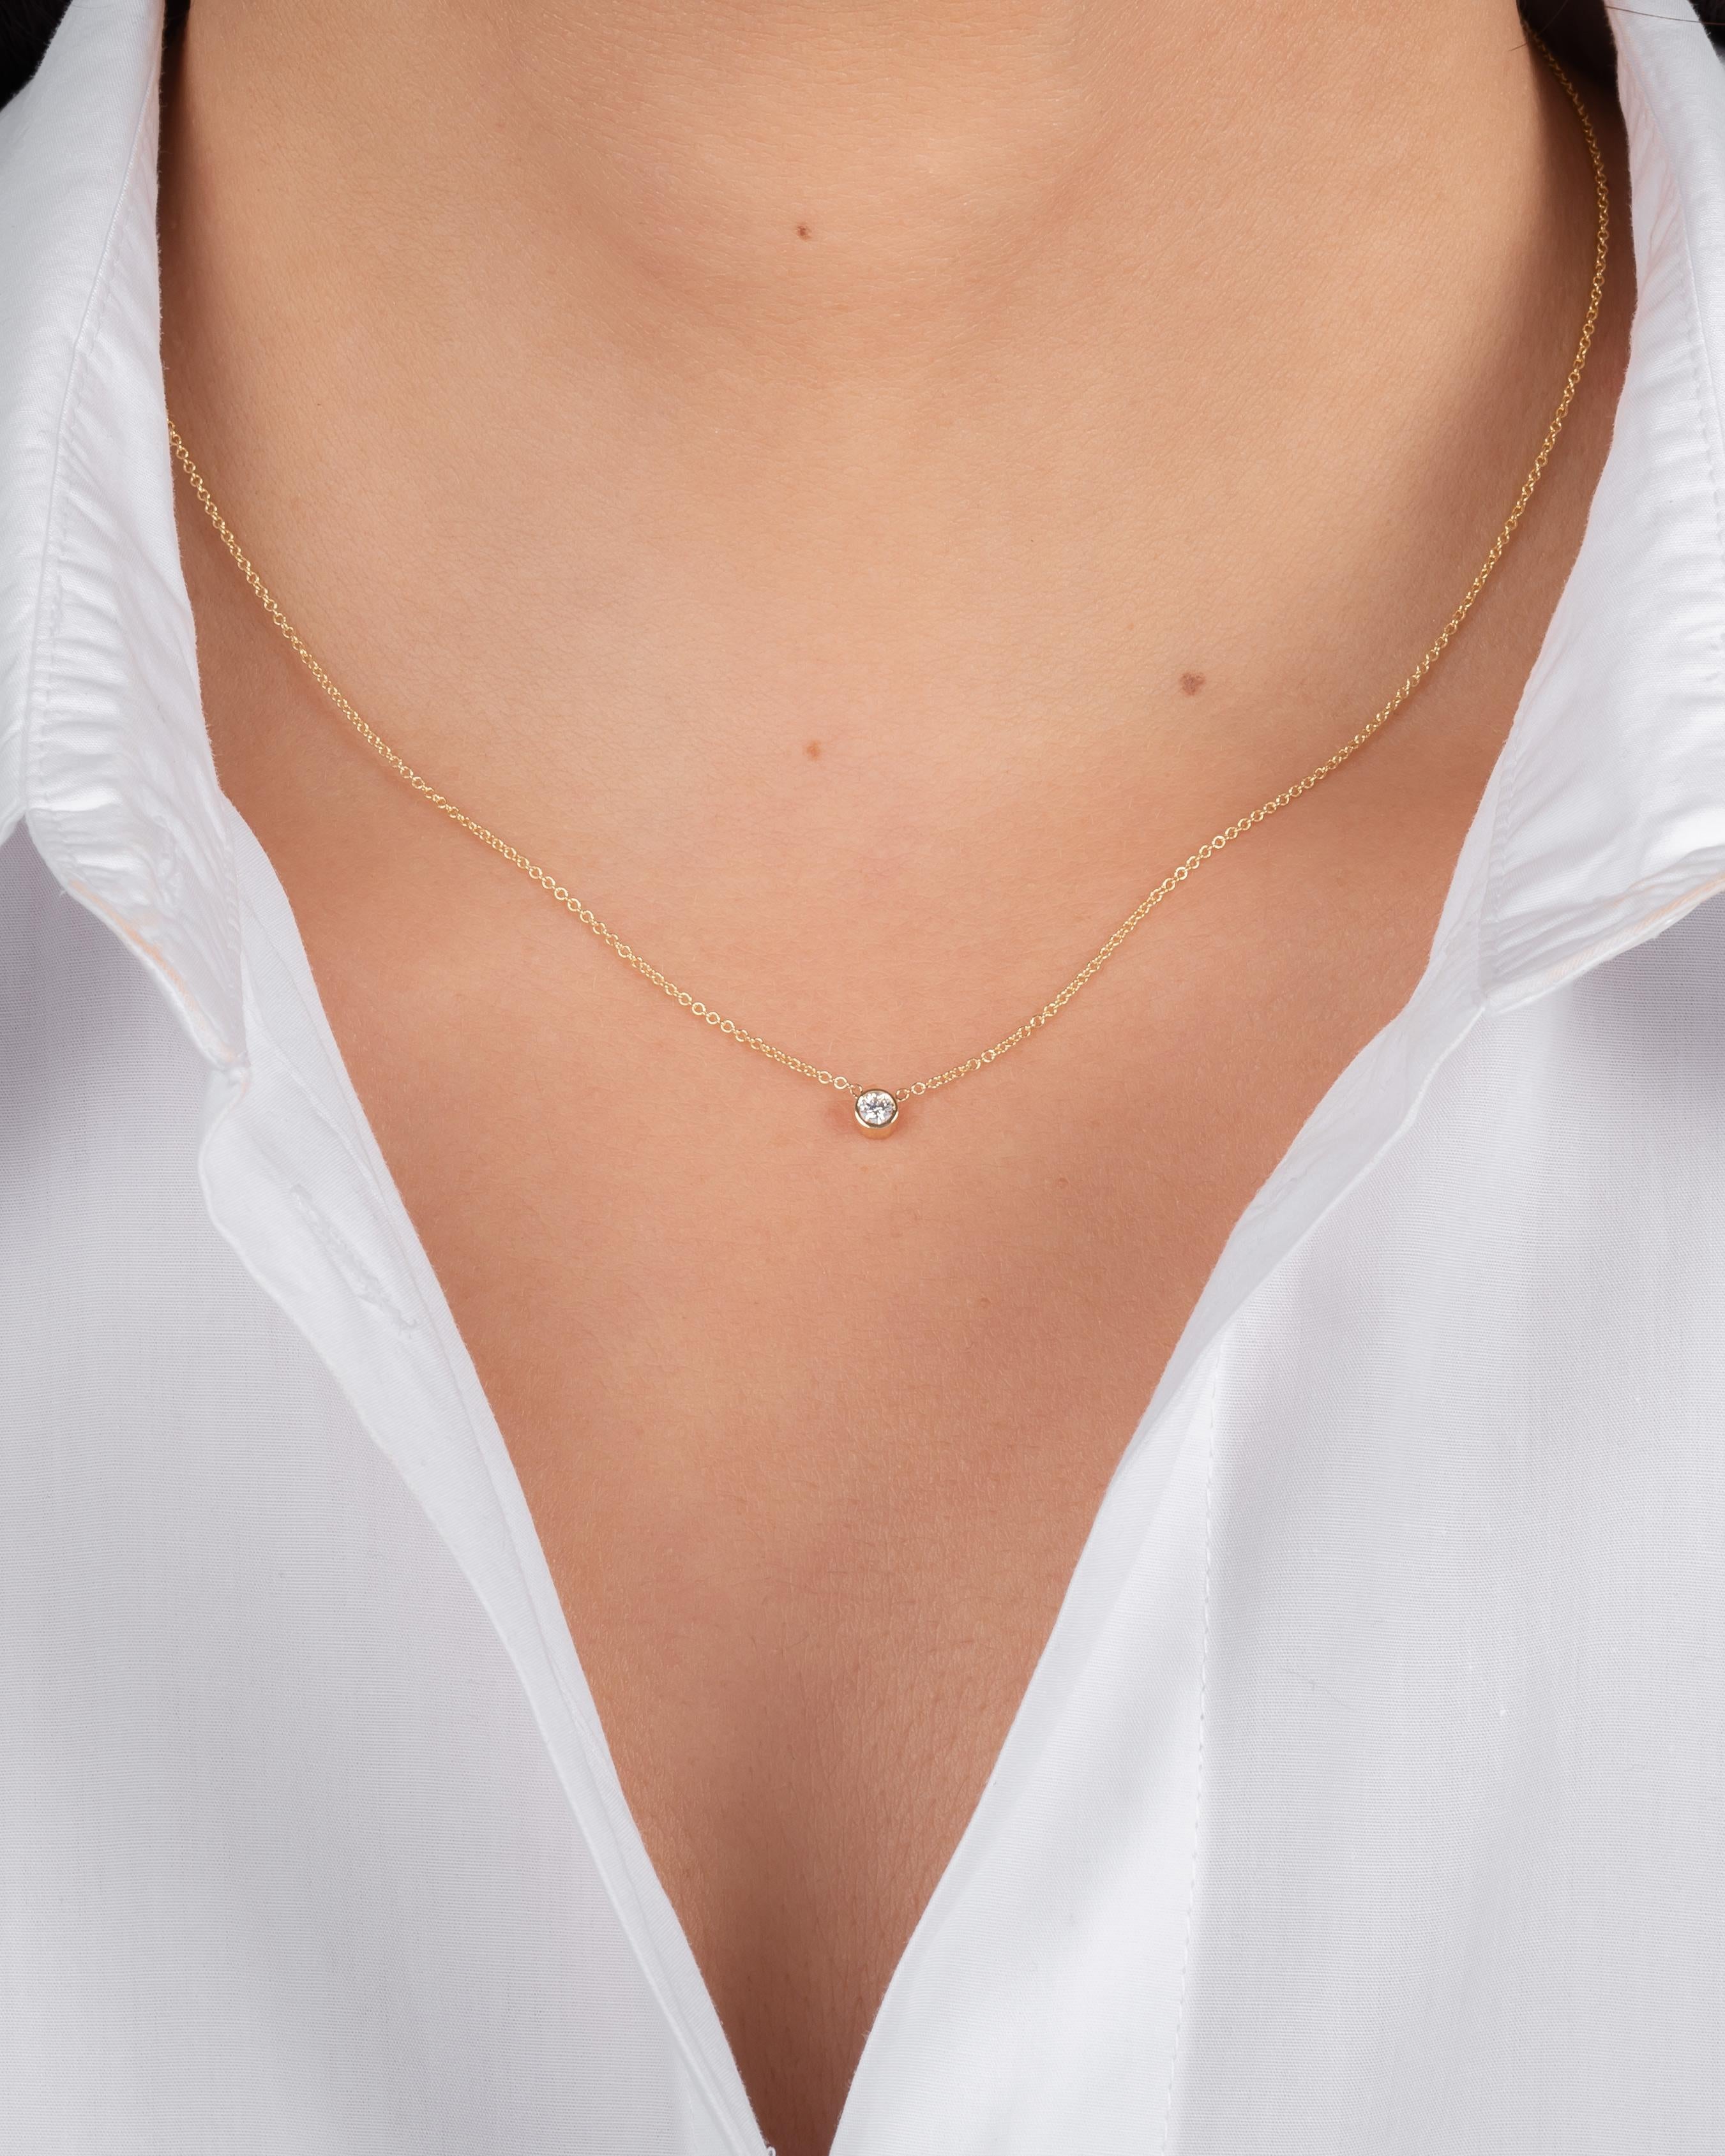 Beautifully handcrafted round single diamond in a 14k solid gold small bezel cup hanging from a dainty cable link chain. Chic and timeless, wear it by itself or layered, day or night.

Made in L.A.
14k Yellow Gold
16